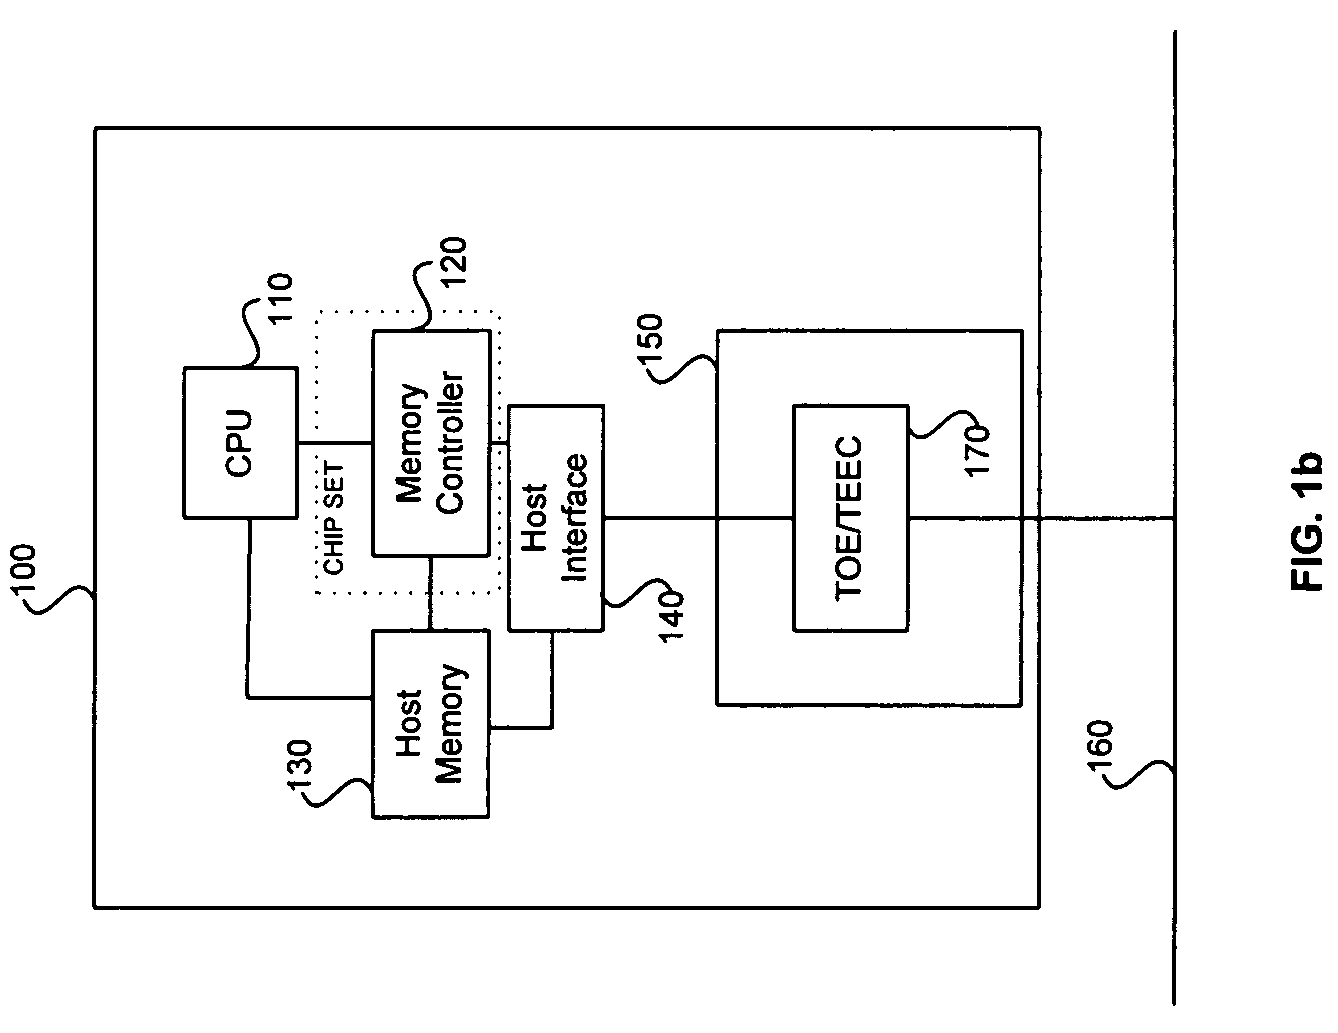 Method and system for transmission control protocol (TCP) traffic smoothing